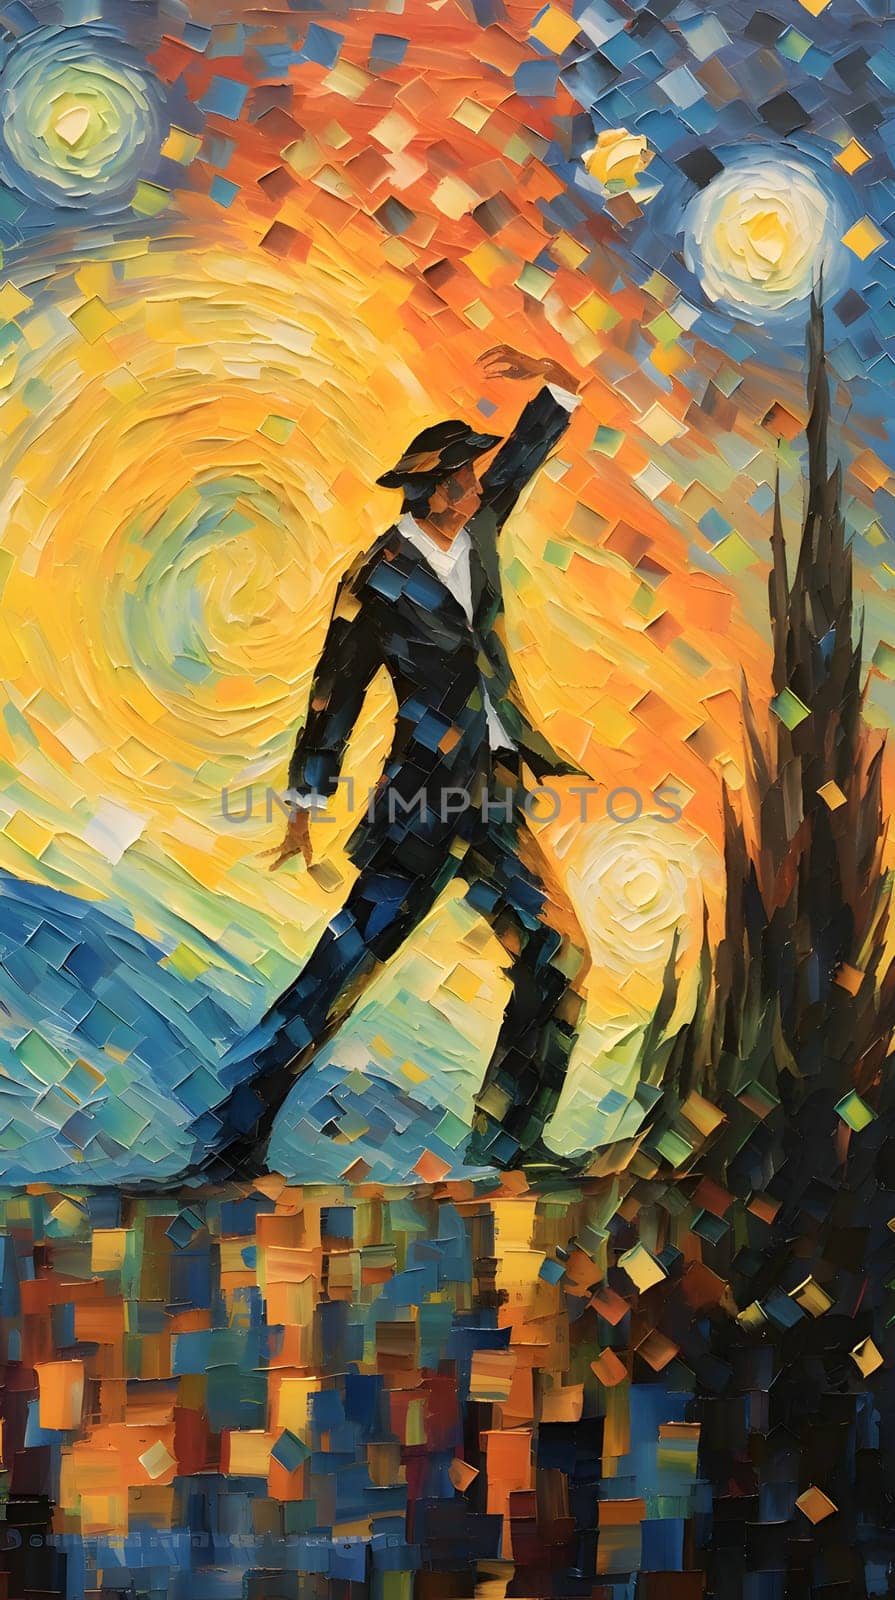 Abstract illustration: Original oil painting of a man in a suit and hat dancing in the sun